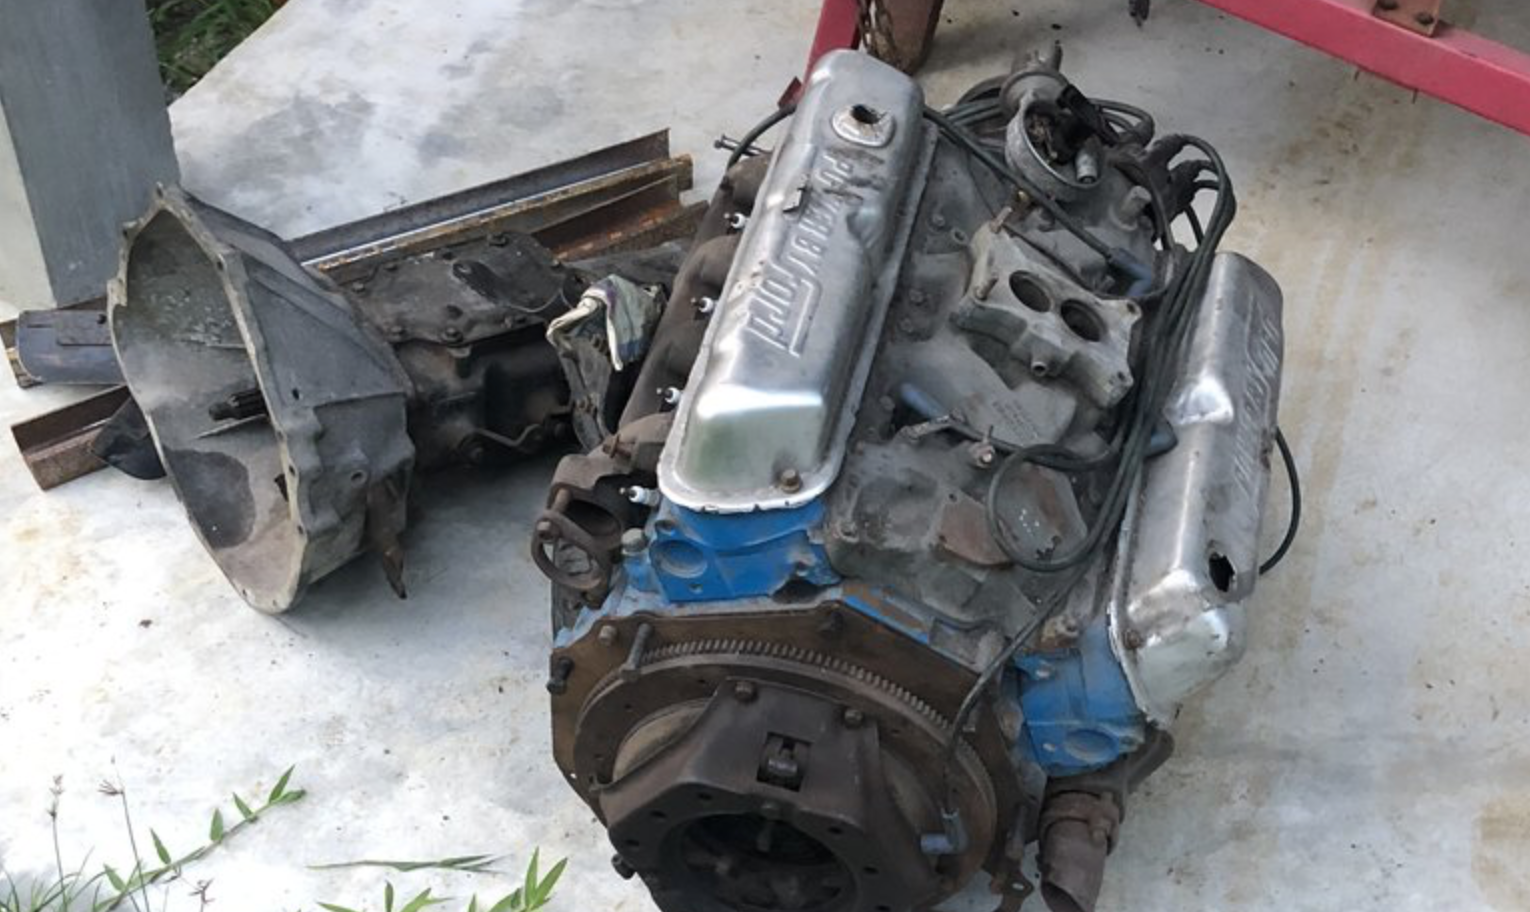 302 V8 engine found for the ‘69 Mustang